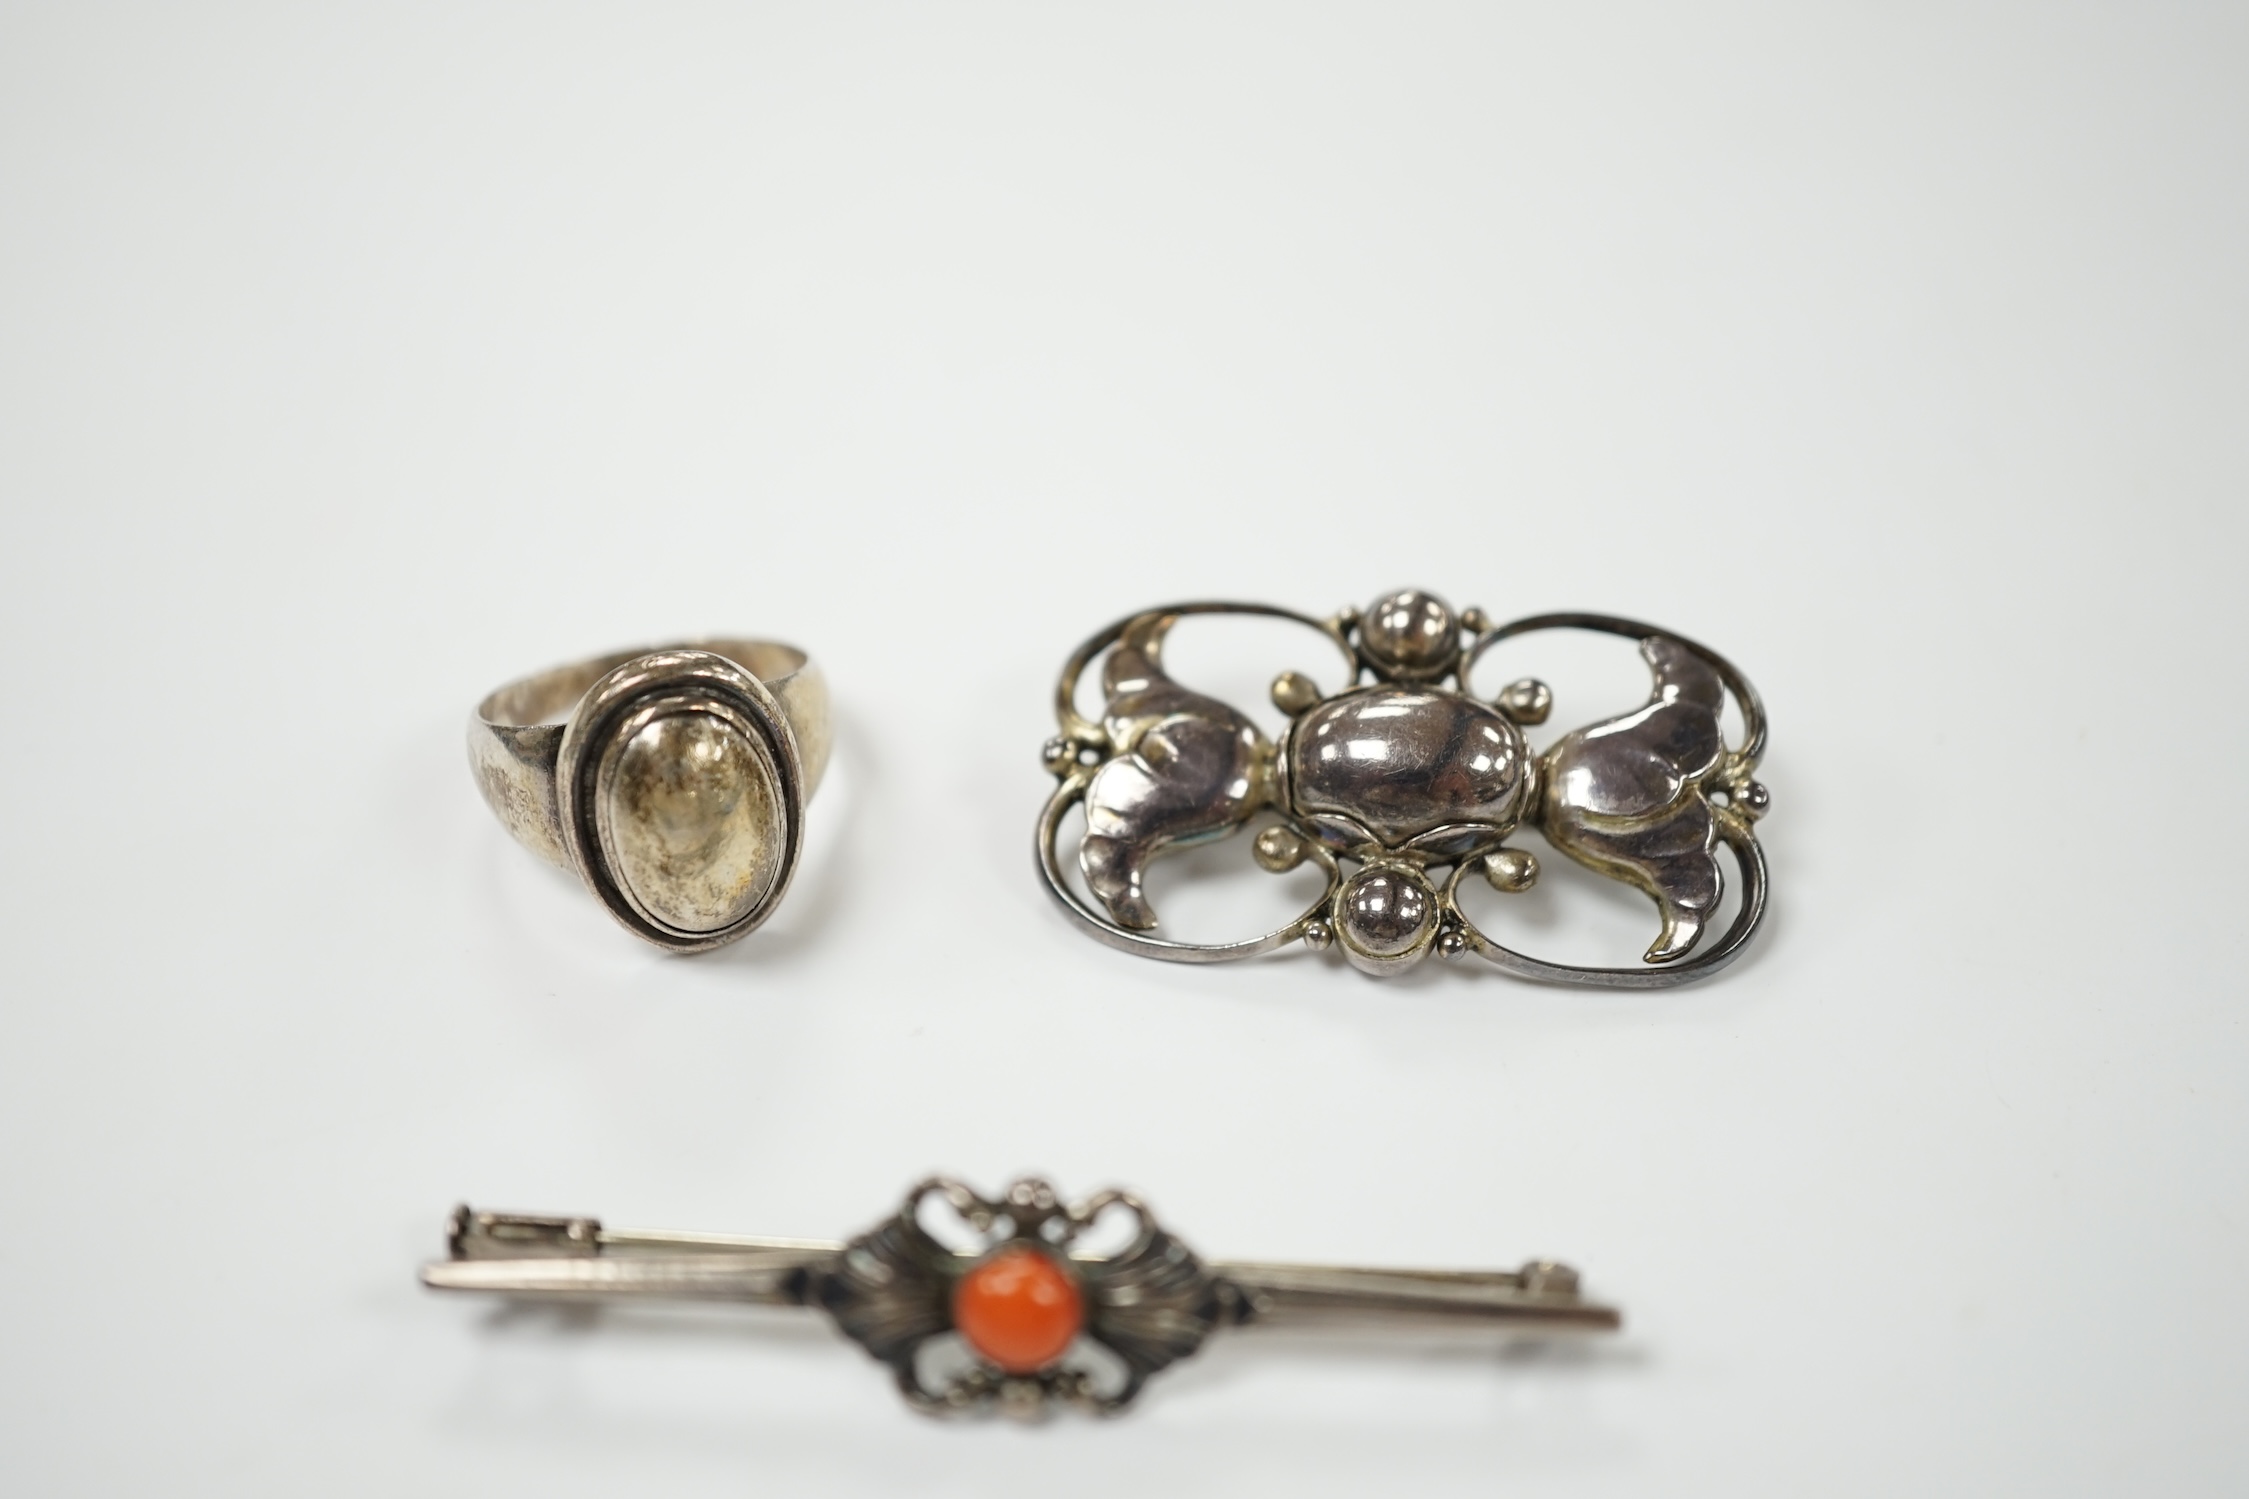 A Georg Jensen sterling and cabochon coral set bar brooch, design no. 214, 53mm, a similar Jensen brooch, design no. 236A, 37mm and a similar ring, design no. 46B, size M. Condition - fair to good